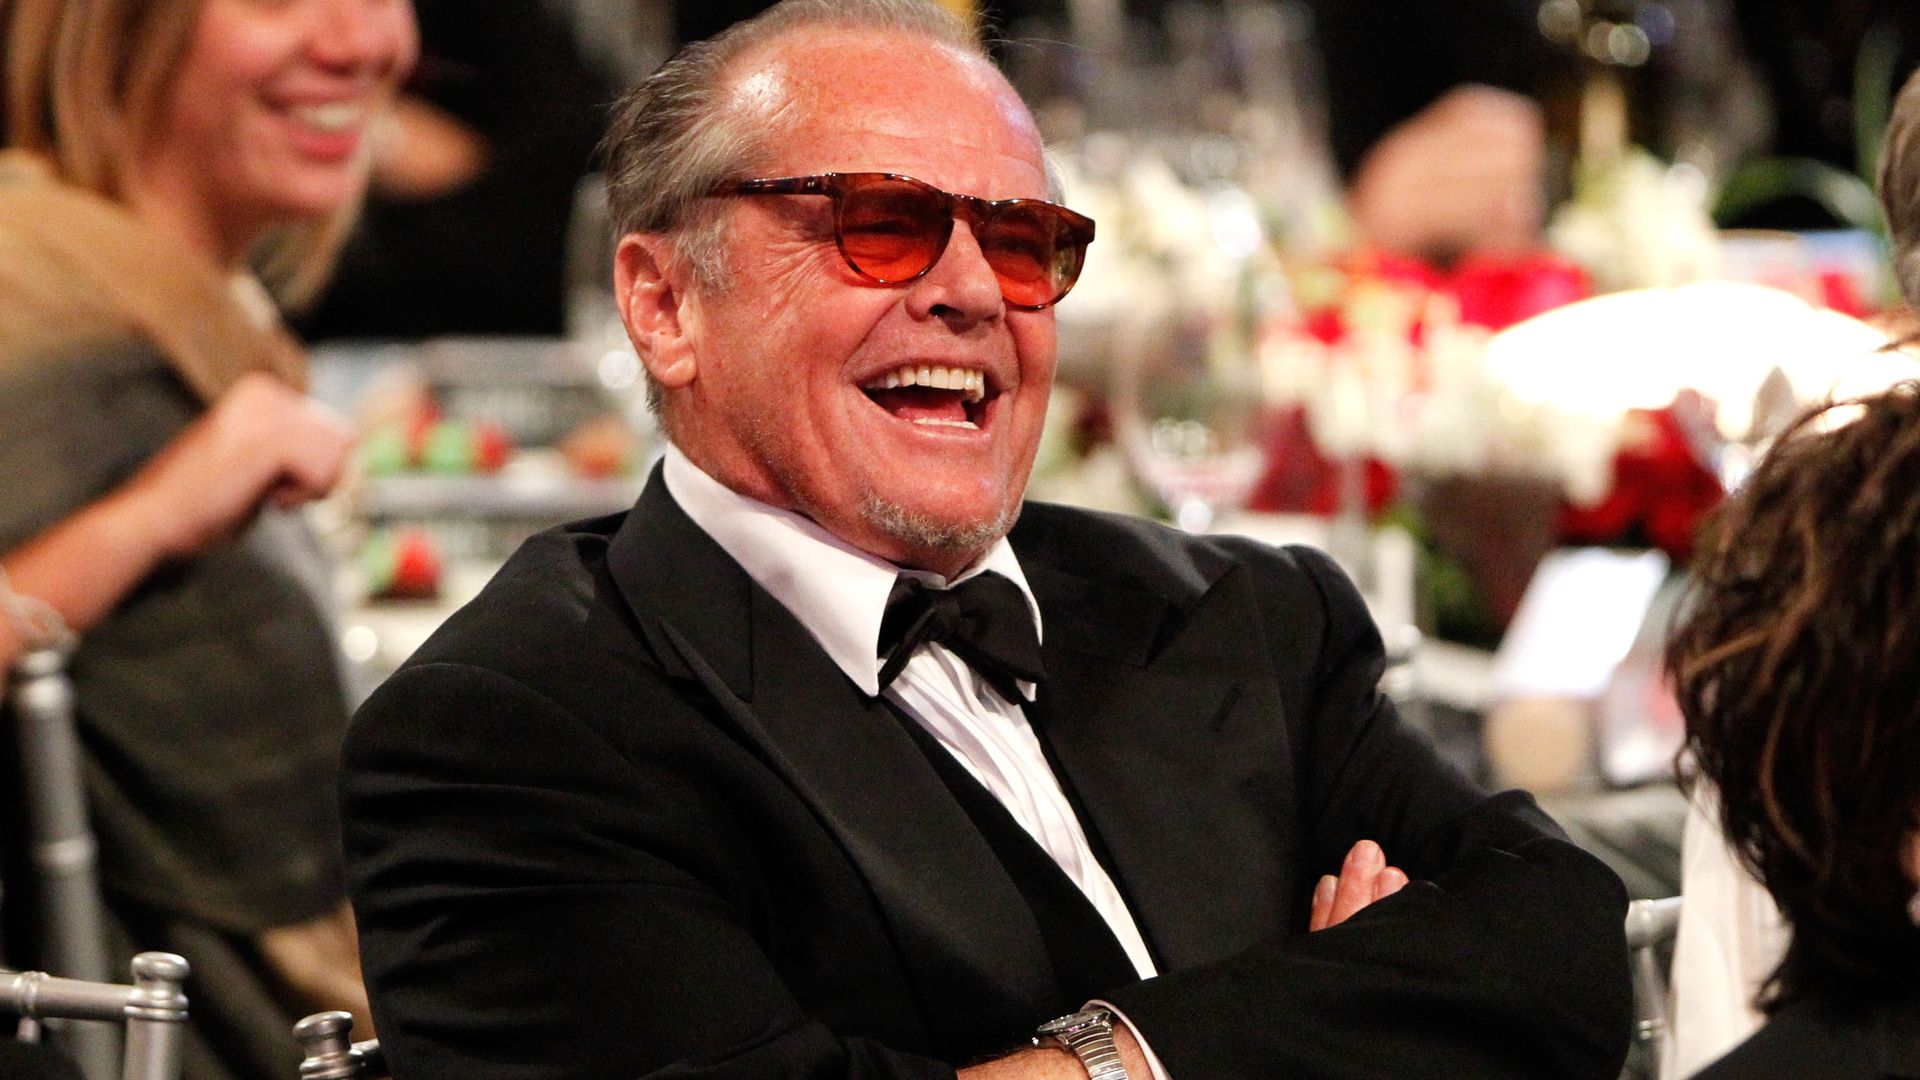 Jack Nicholson shocks fans with rare appearance for NBA playoffs